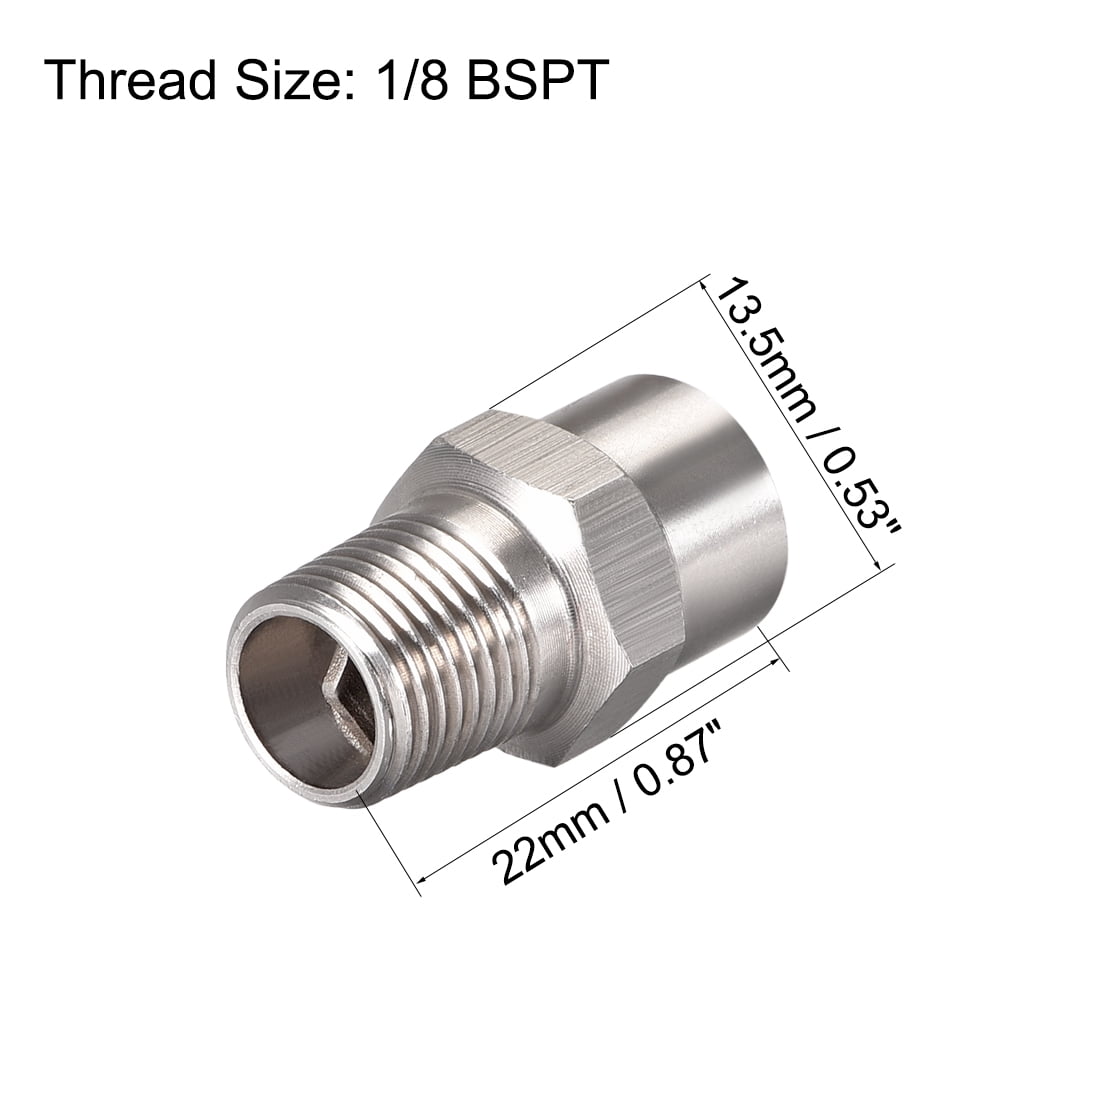 5pcs New Stainless steel spiral Cone spray nozzle  1/2" bspt 